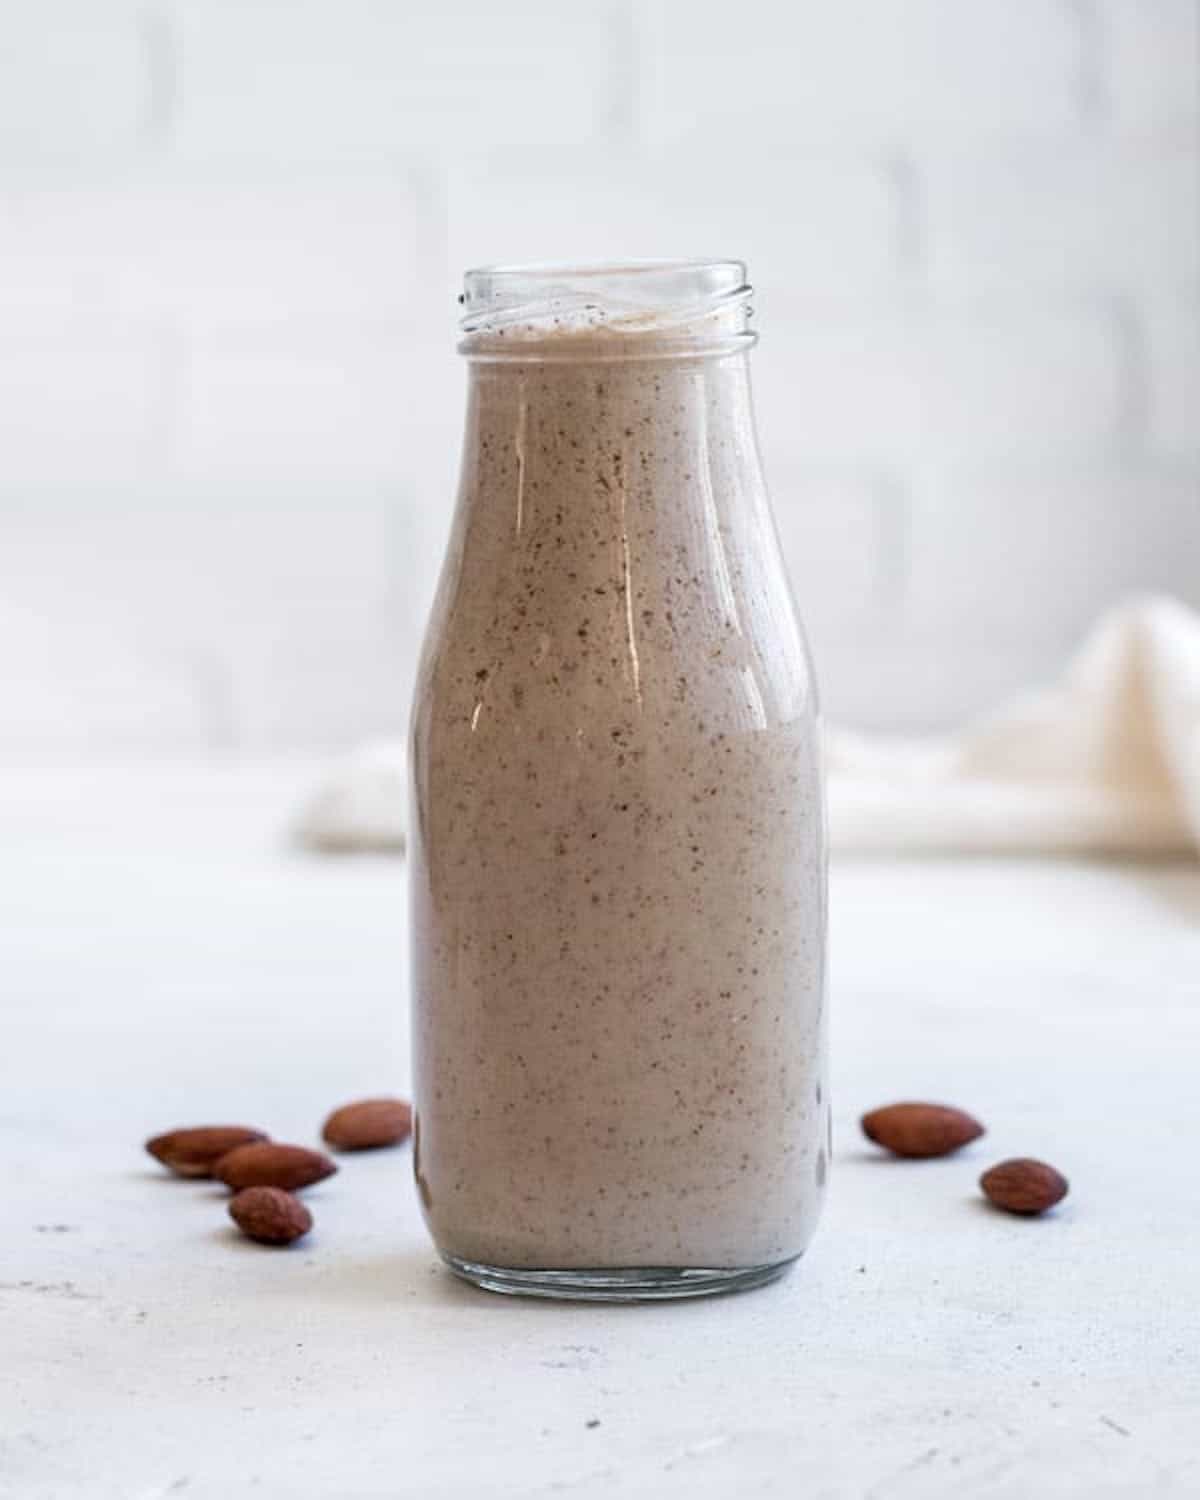 one brown speckled smoothie in a milk jar surrounded by whole almonds on a white background